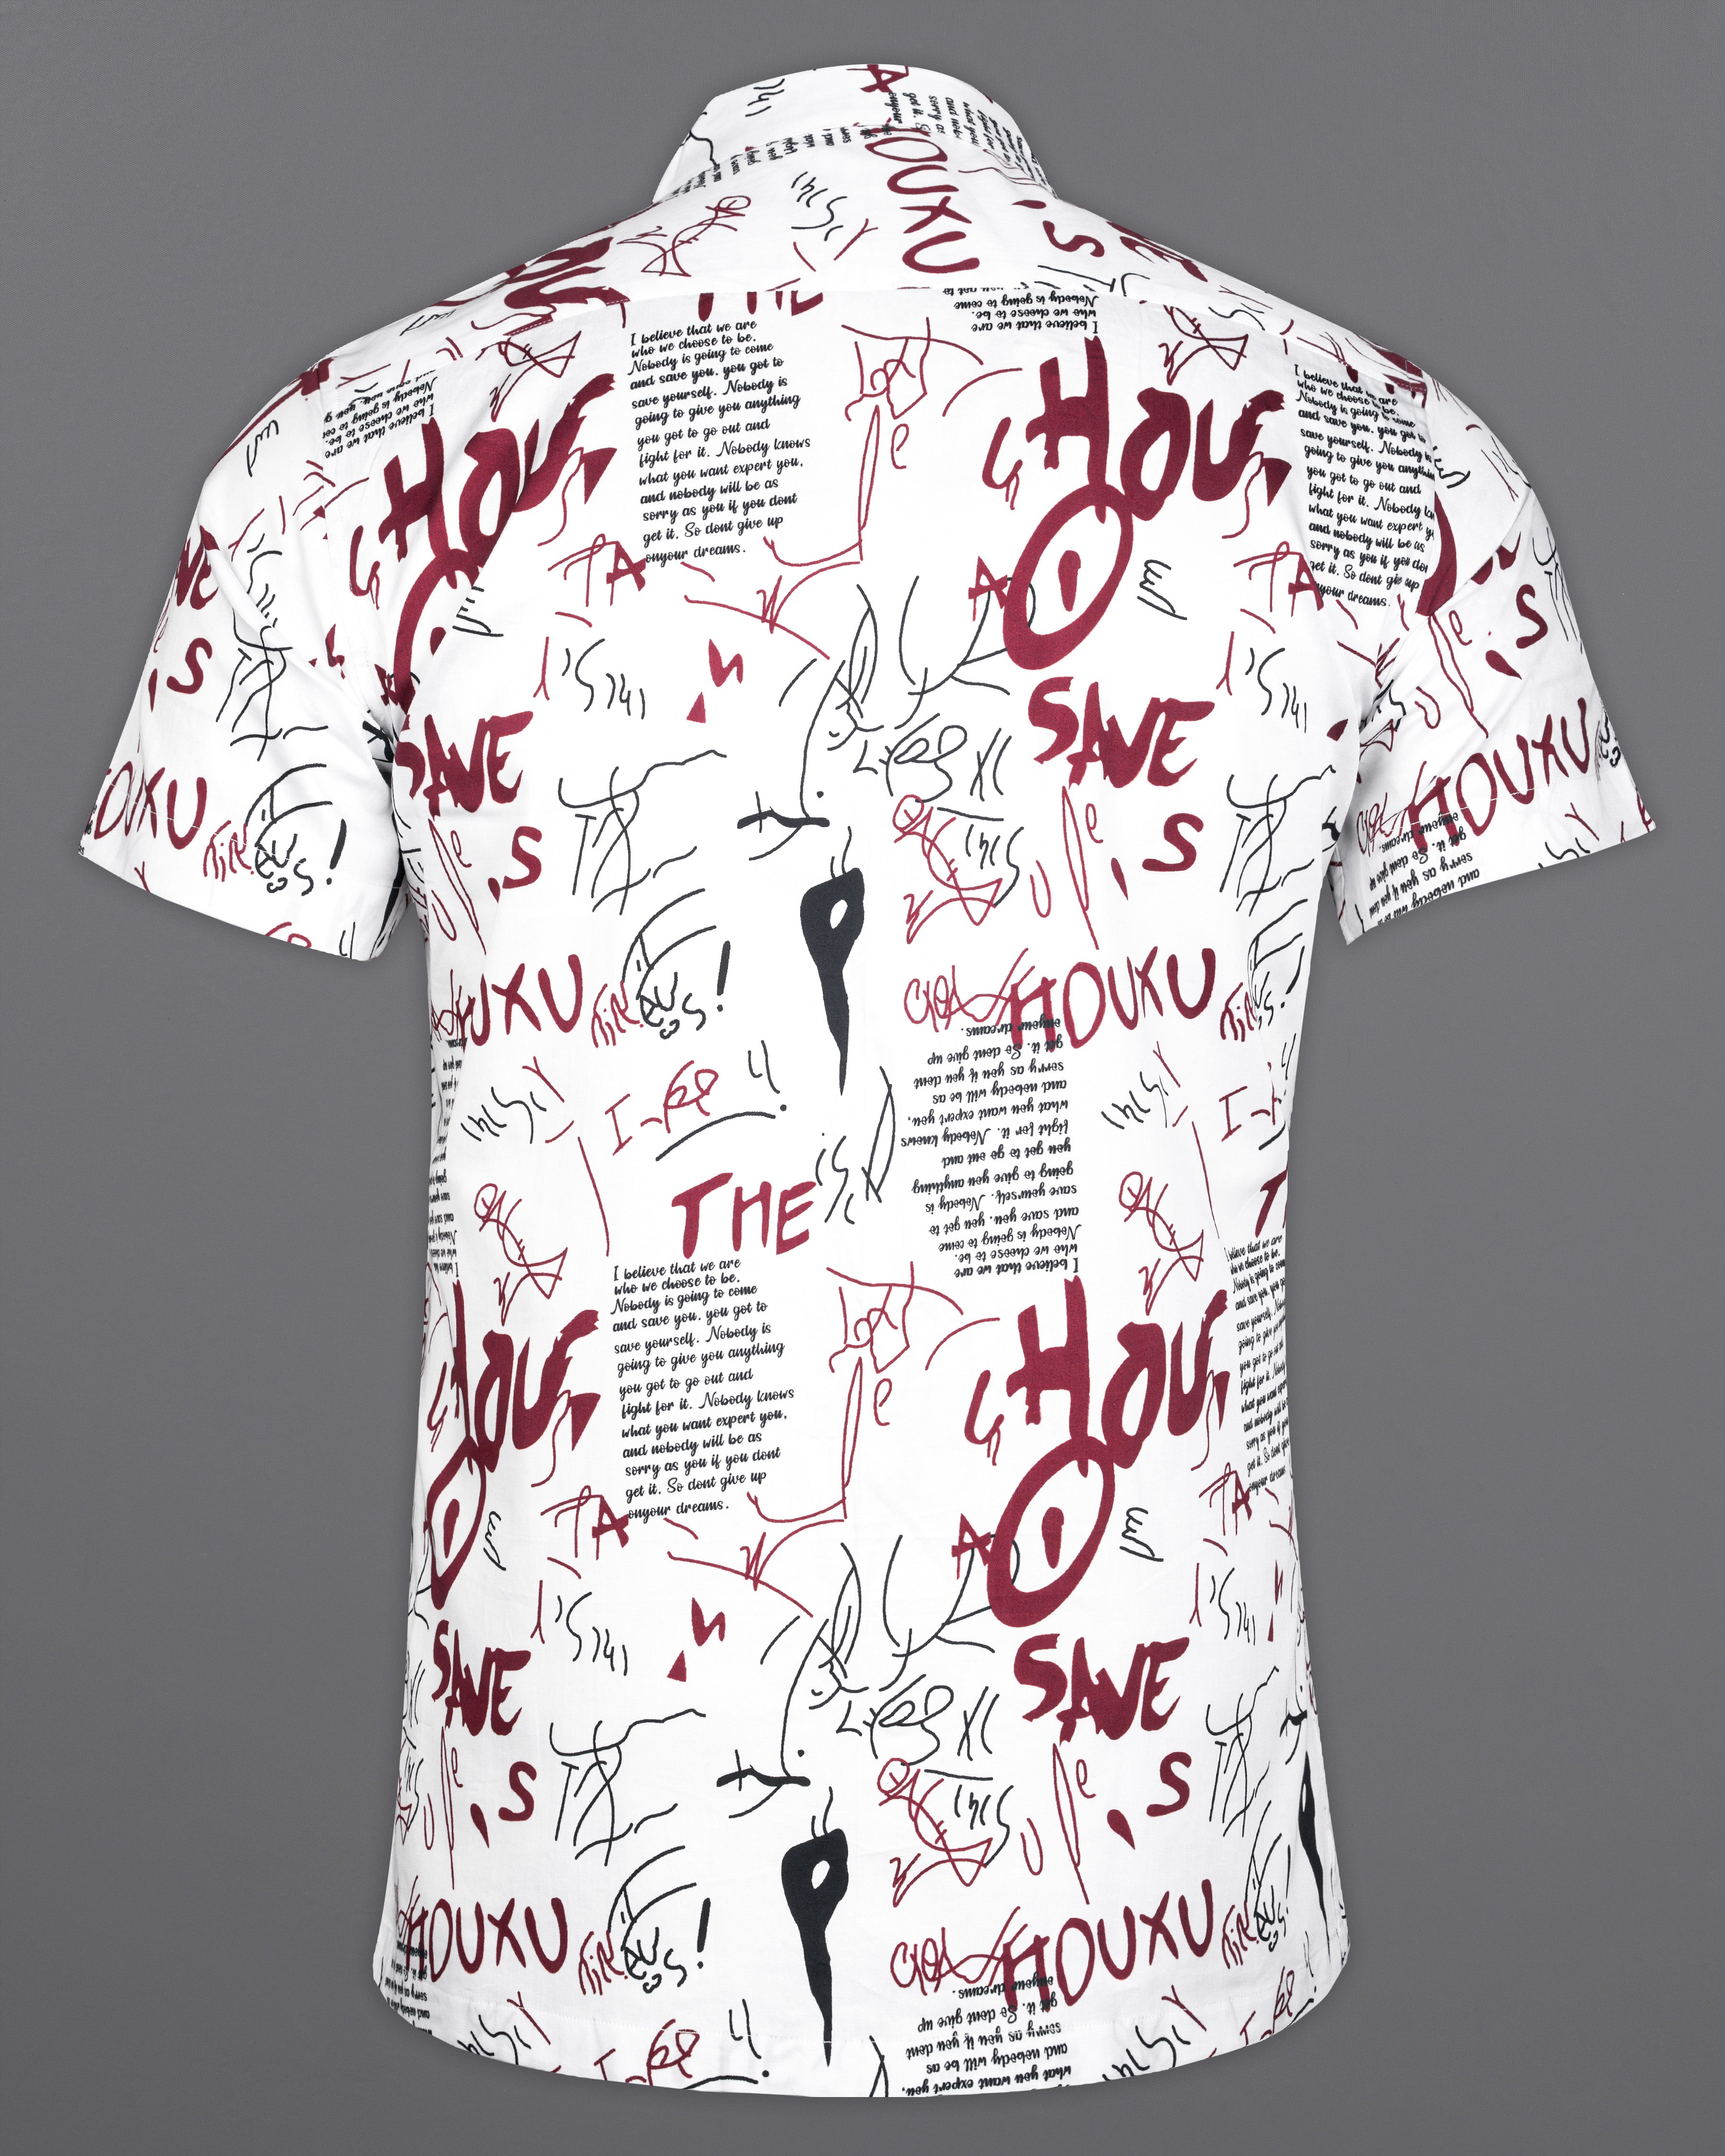 Bright White with Wine Doodle Printed Super Soft Shirt 9956-CC-SS-MN-38, 9956-CC-SS-MN-39, 9956-CC-SS-MN-40, 9956-CC-SS-MN-42, 9956-CC-SS-MN-44, 9956-CC-SS-MN-46, 9956-CC-SS-MN-48, 9956-CC-SS-MN-50, 9956-CC-SS-MN-52